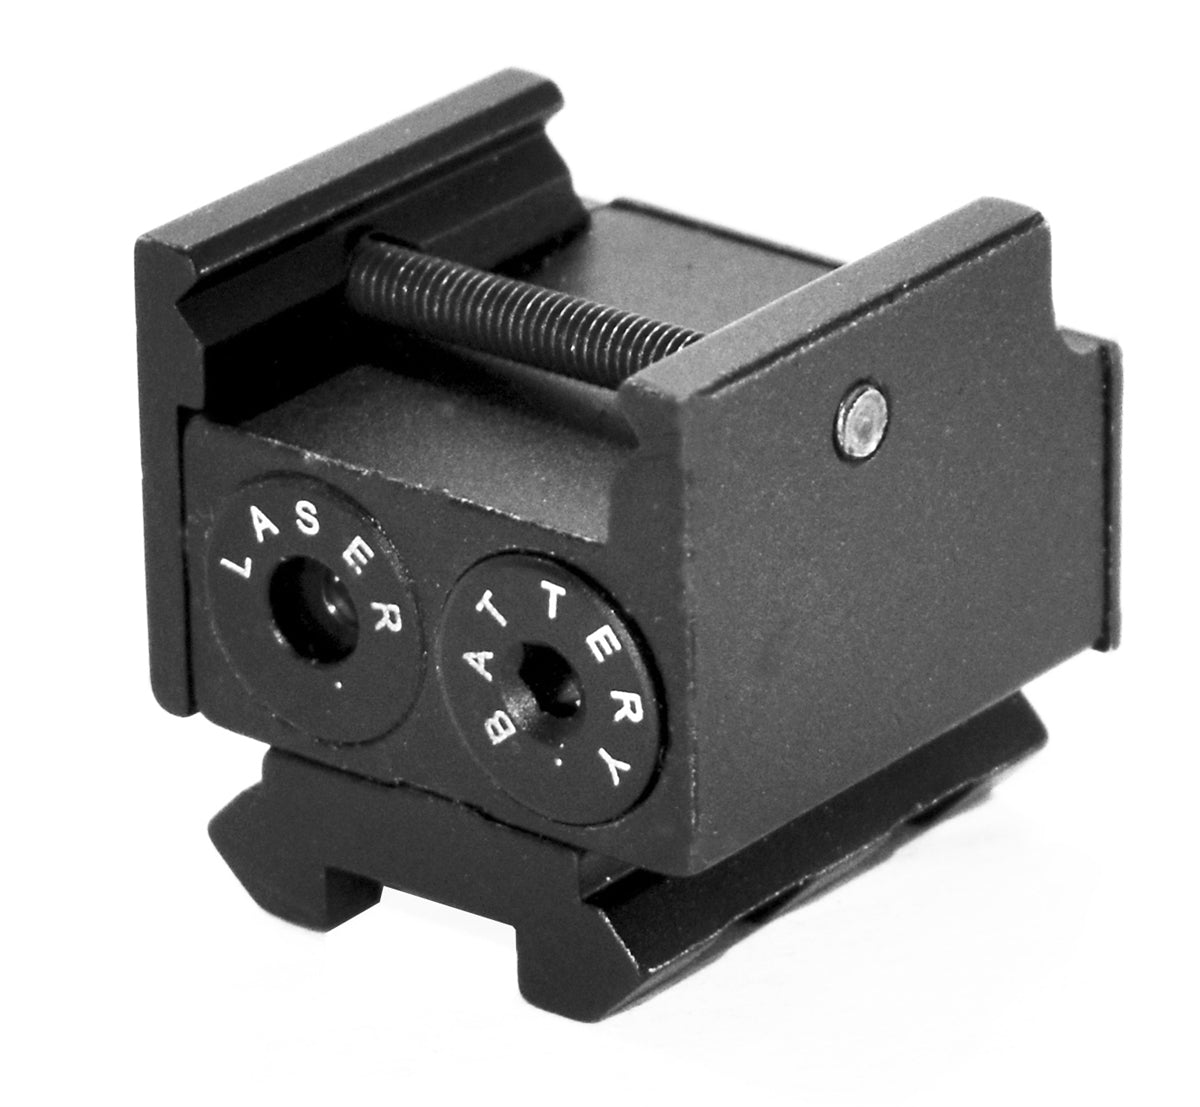 picatinny style red laser for handguns.